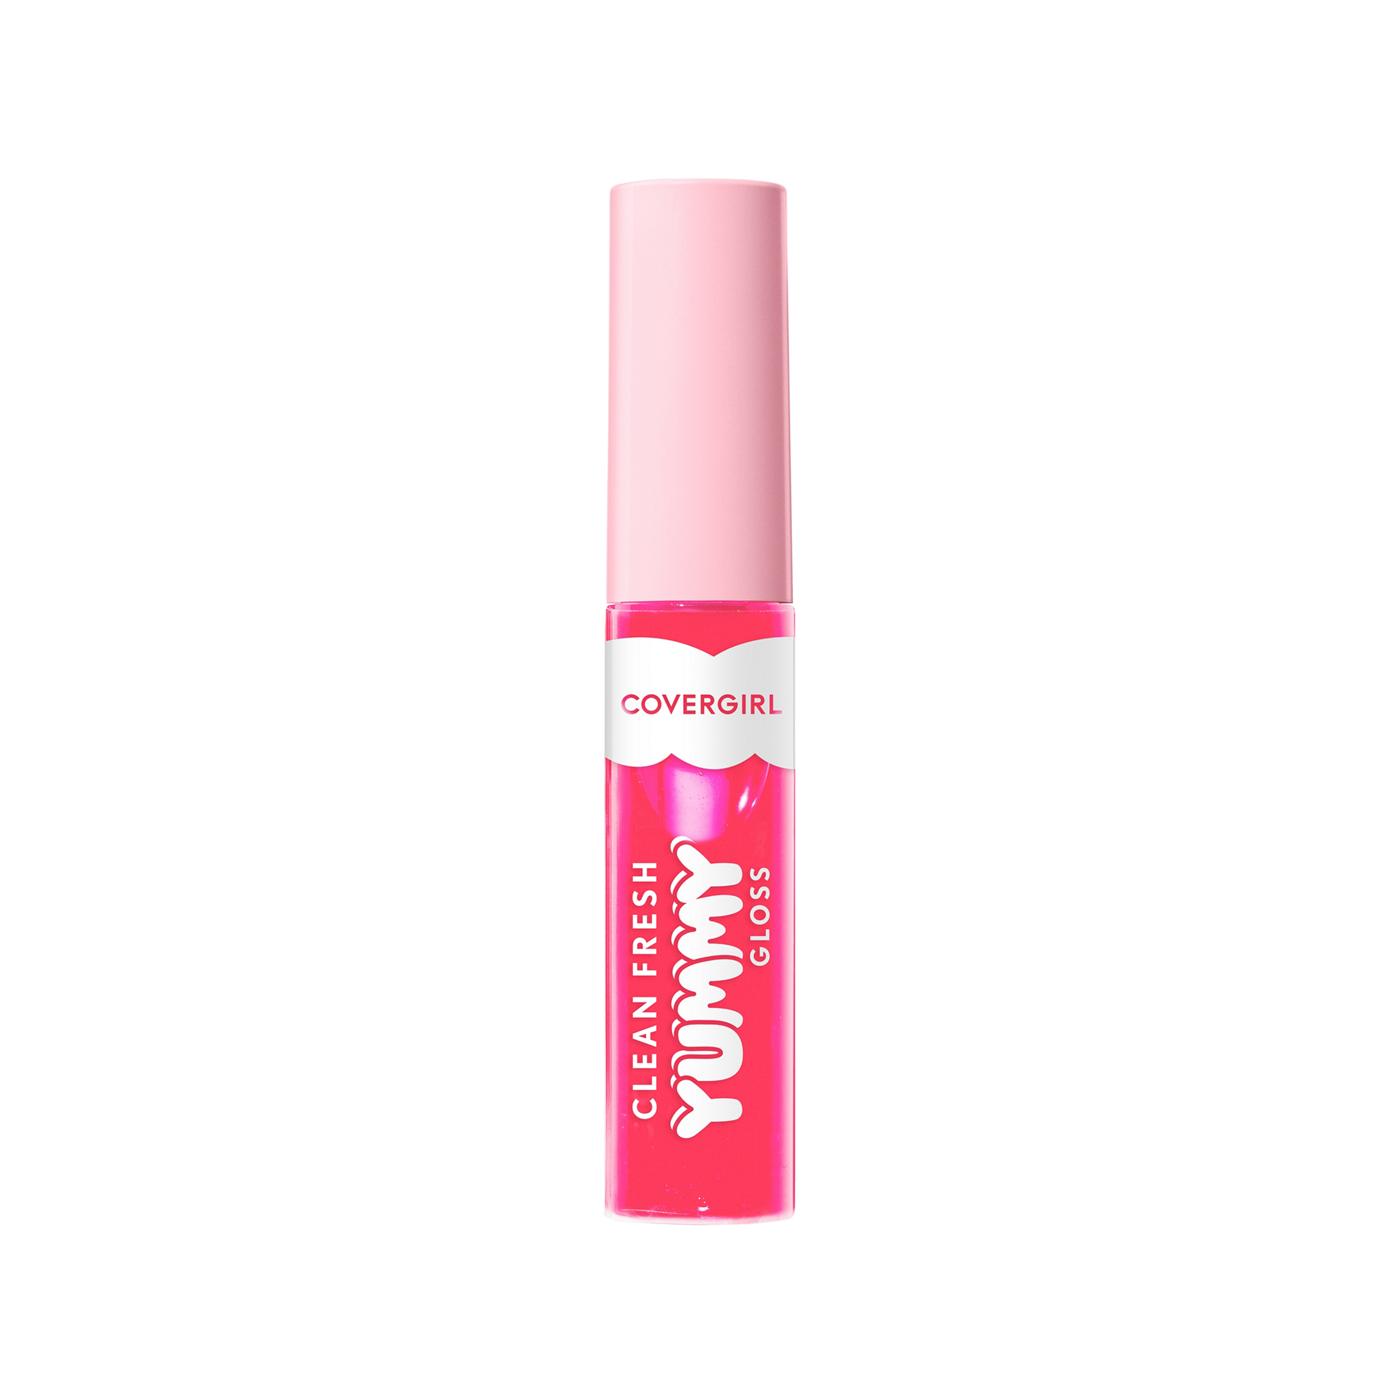 Covergirl Clean Fresh Yummy Lip Gloss - But First a Cosmo; image 9 of 9